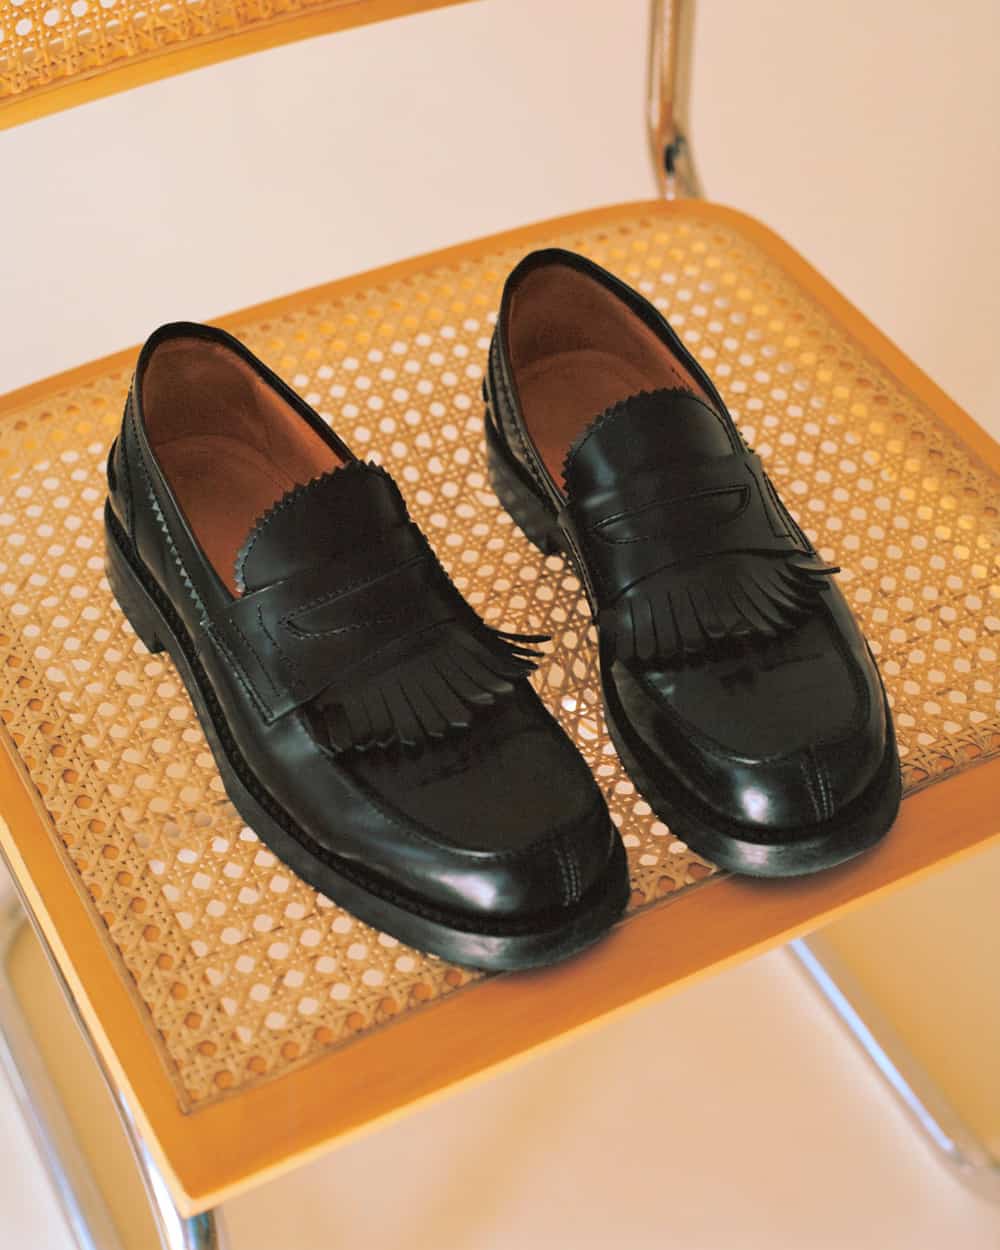 A pair of men's black leather fringed loafers by Our Legacy set on chair